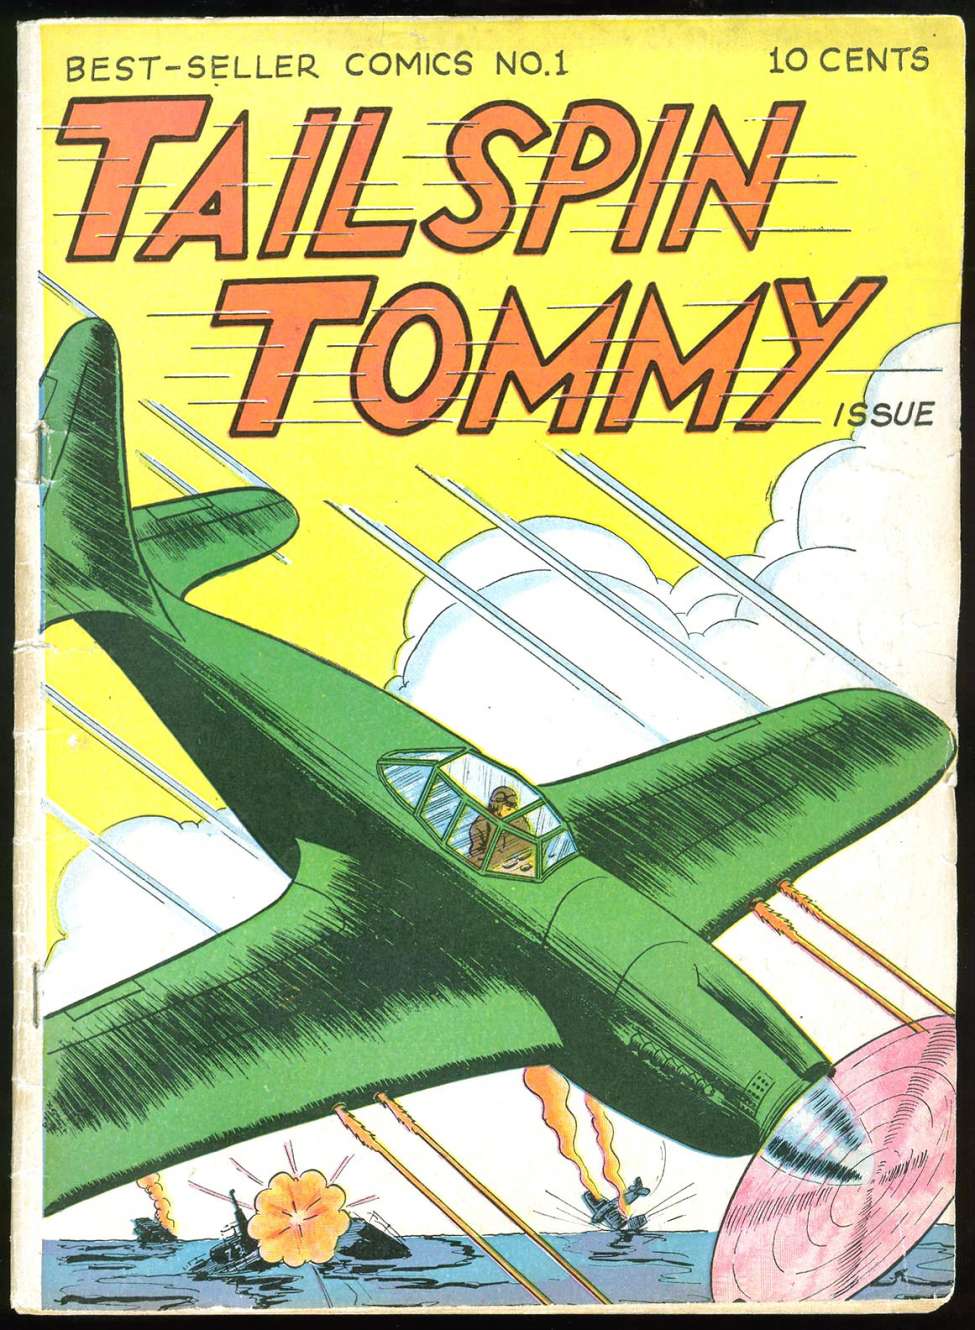 Comic Book Cover For Service Publishing - Best Seller Comics - Tailspin Tommy 1